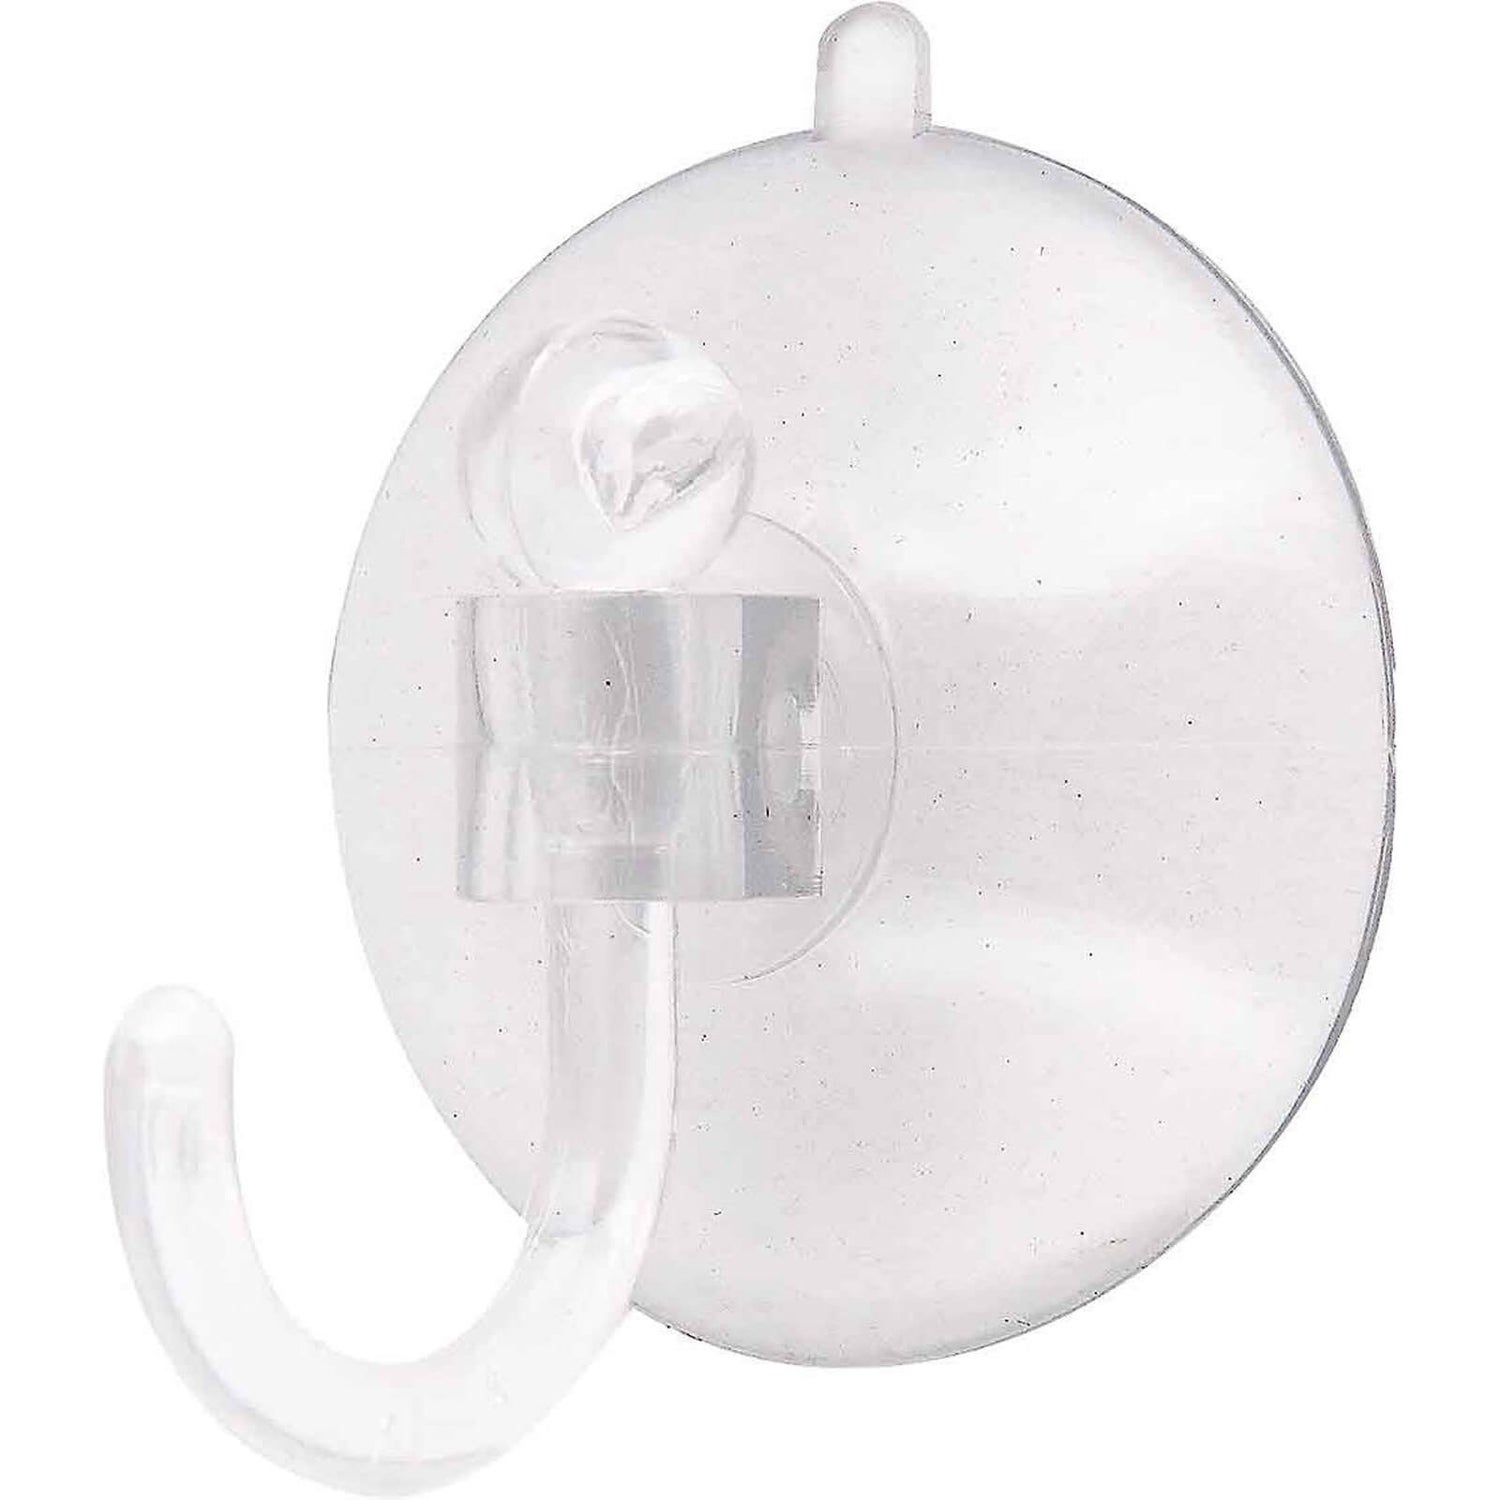 NANDEYIBI SUCTION SUCKER WINDOW HOOKS CLEAR PLASTIC HOOK 25MM pack of 10 